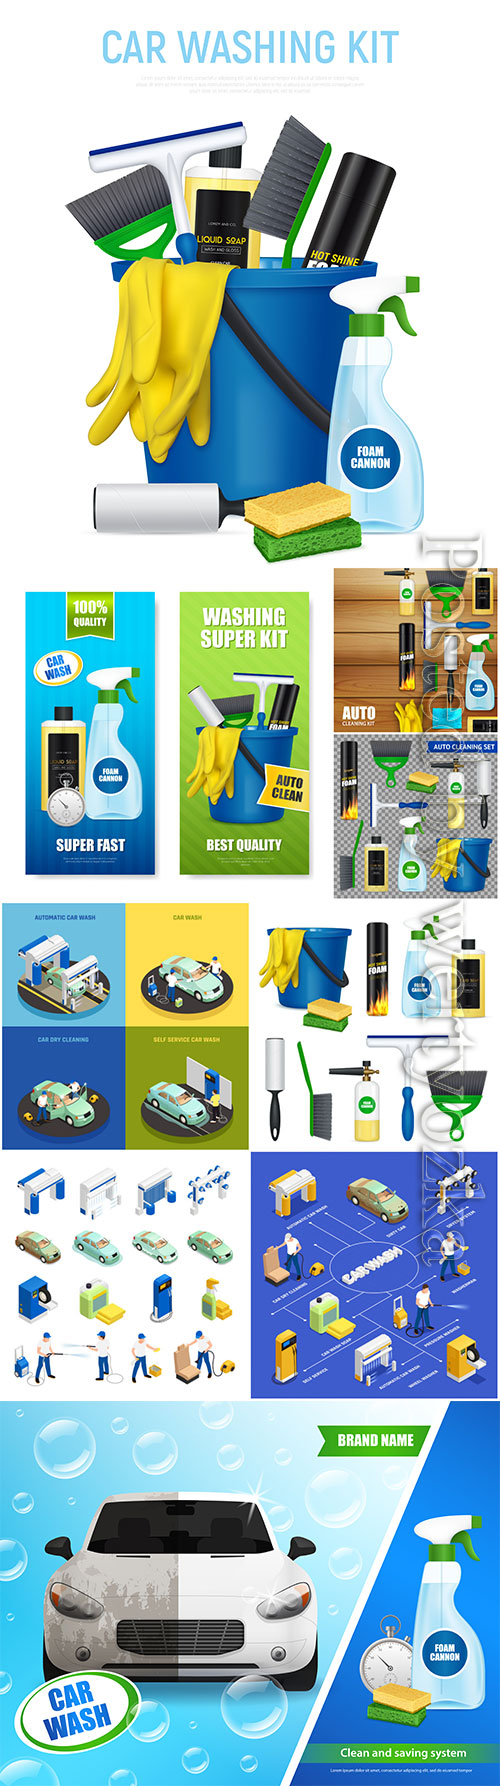 Auto car wash product vector illustration template